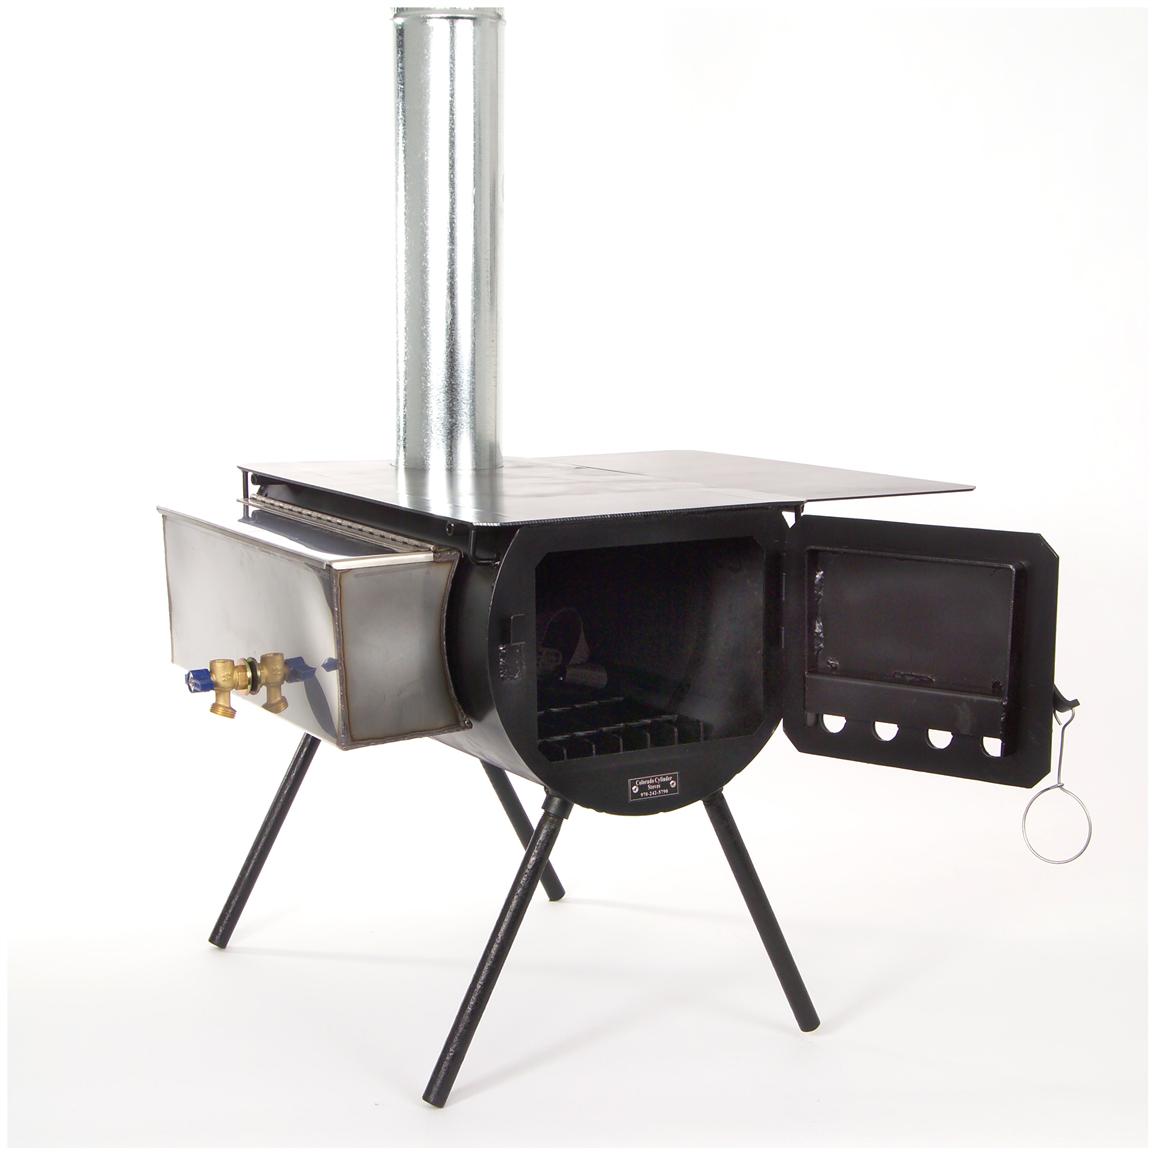 Colorado Cylinder Stoves Spruce Stove Package